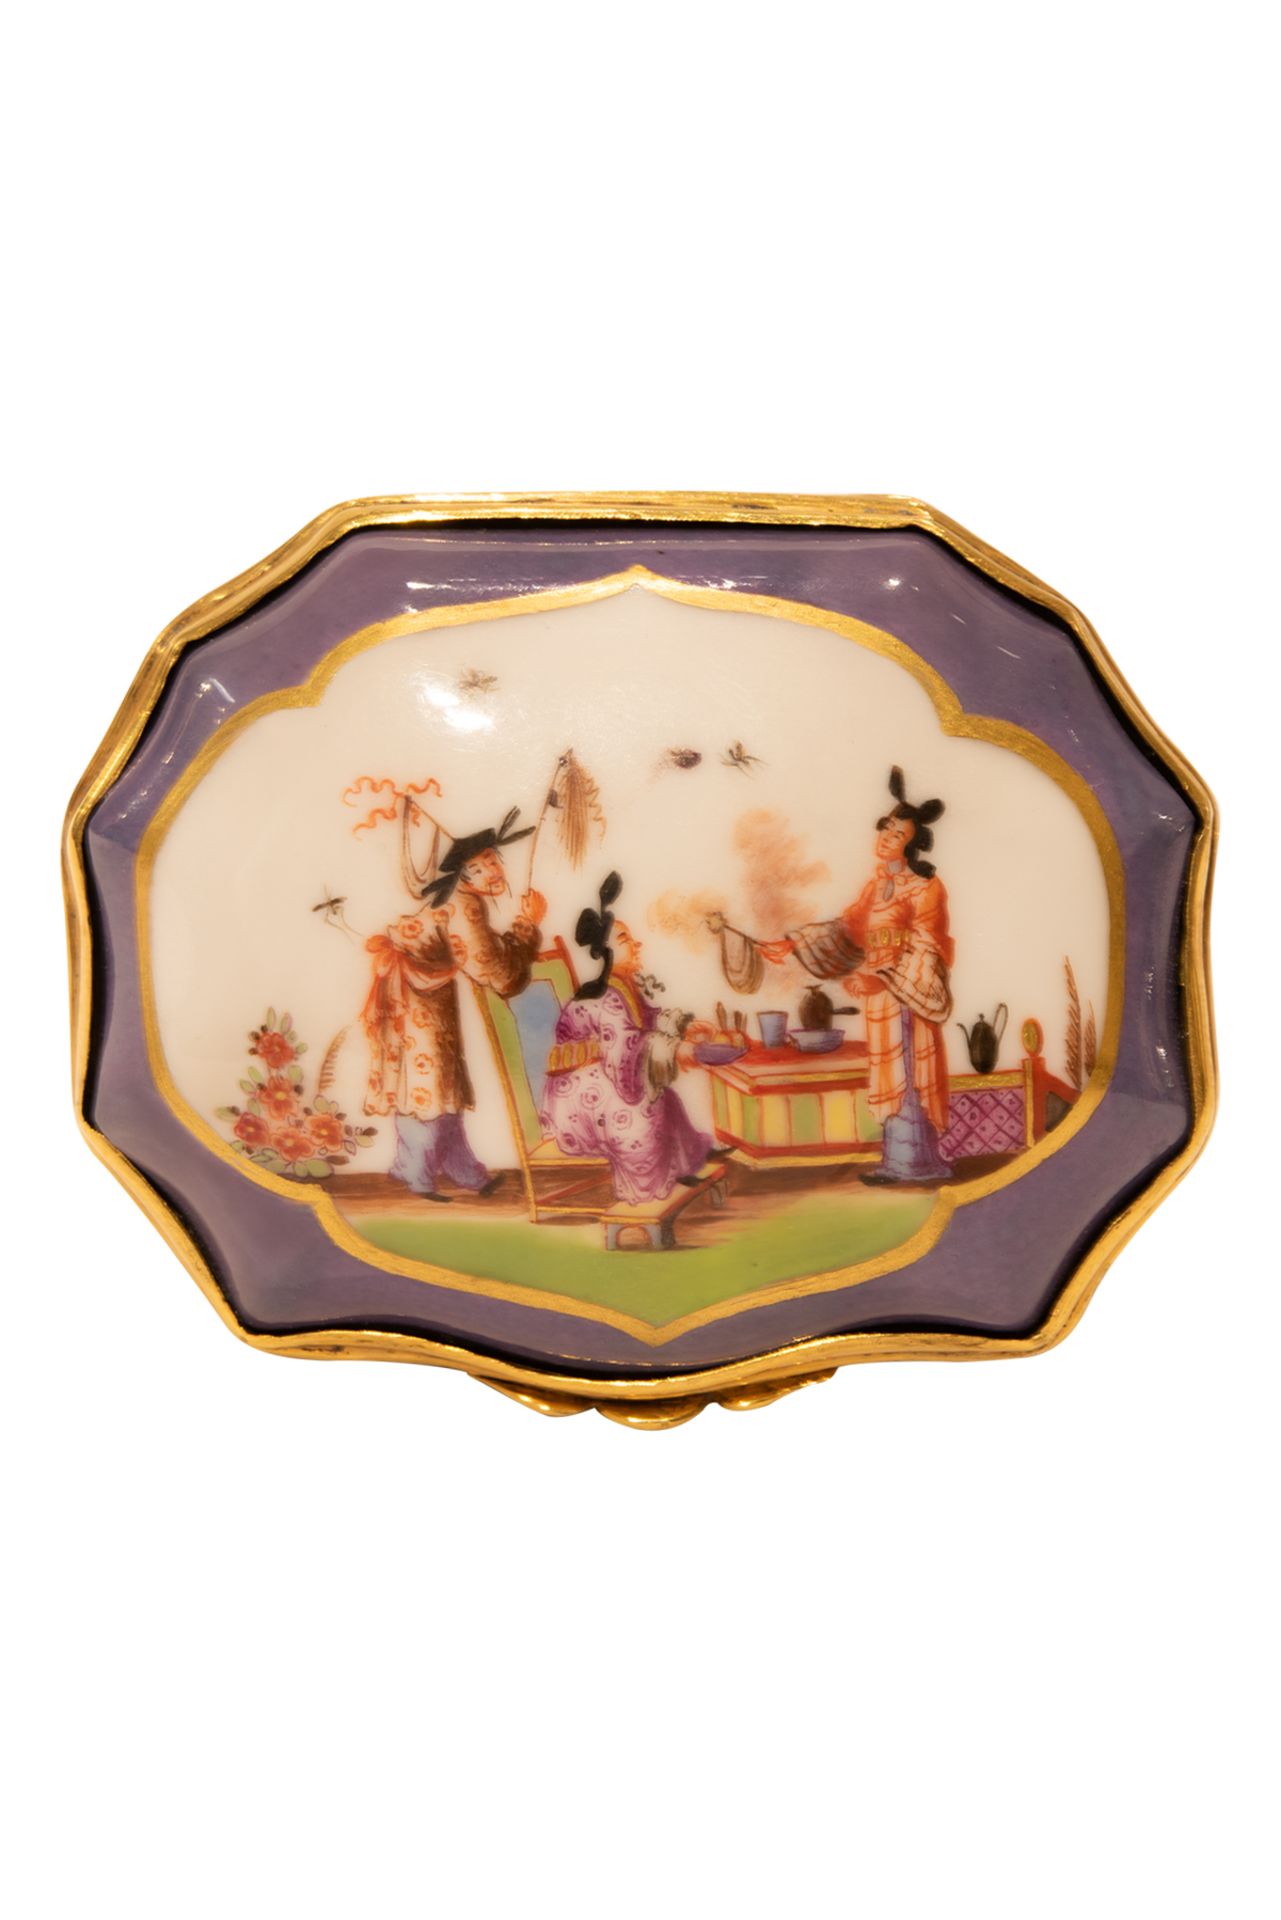 Tabatiere with chinoiseries, Meissen around 1750 - Image 4 of 8